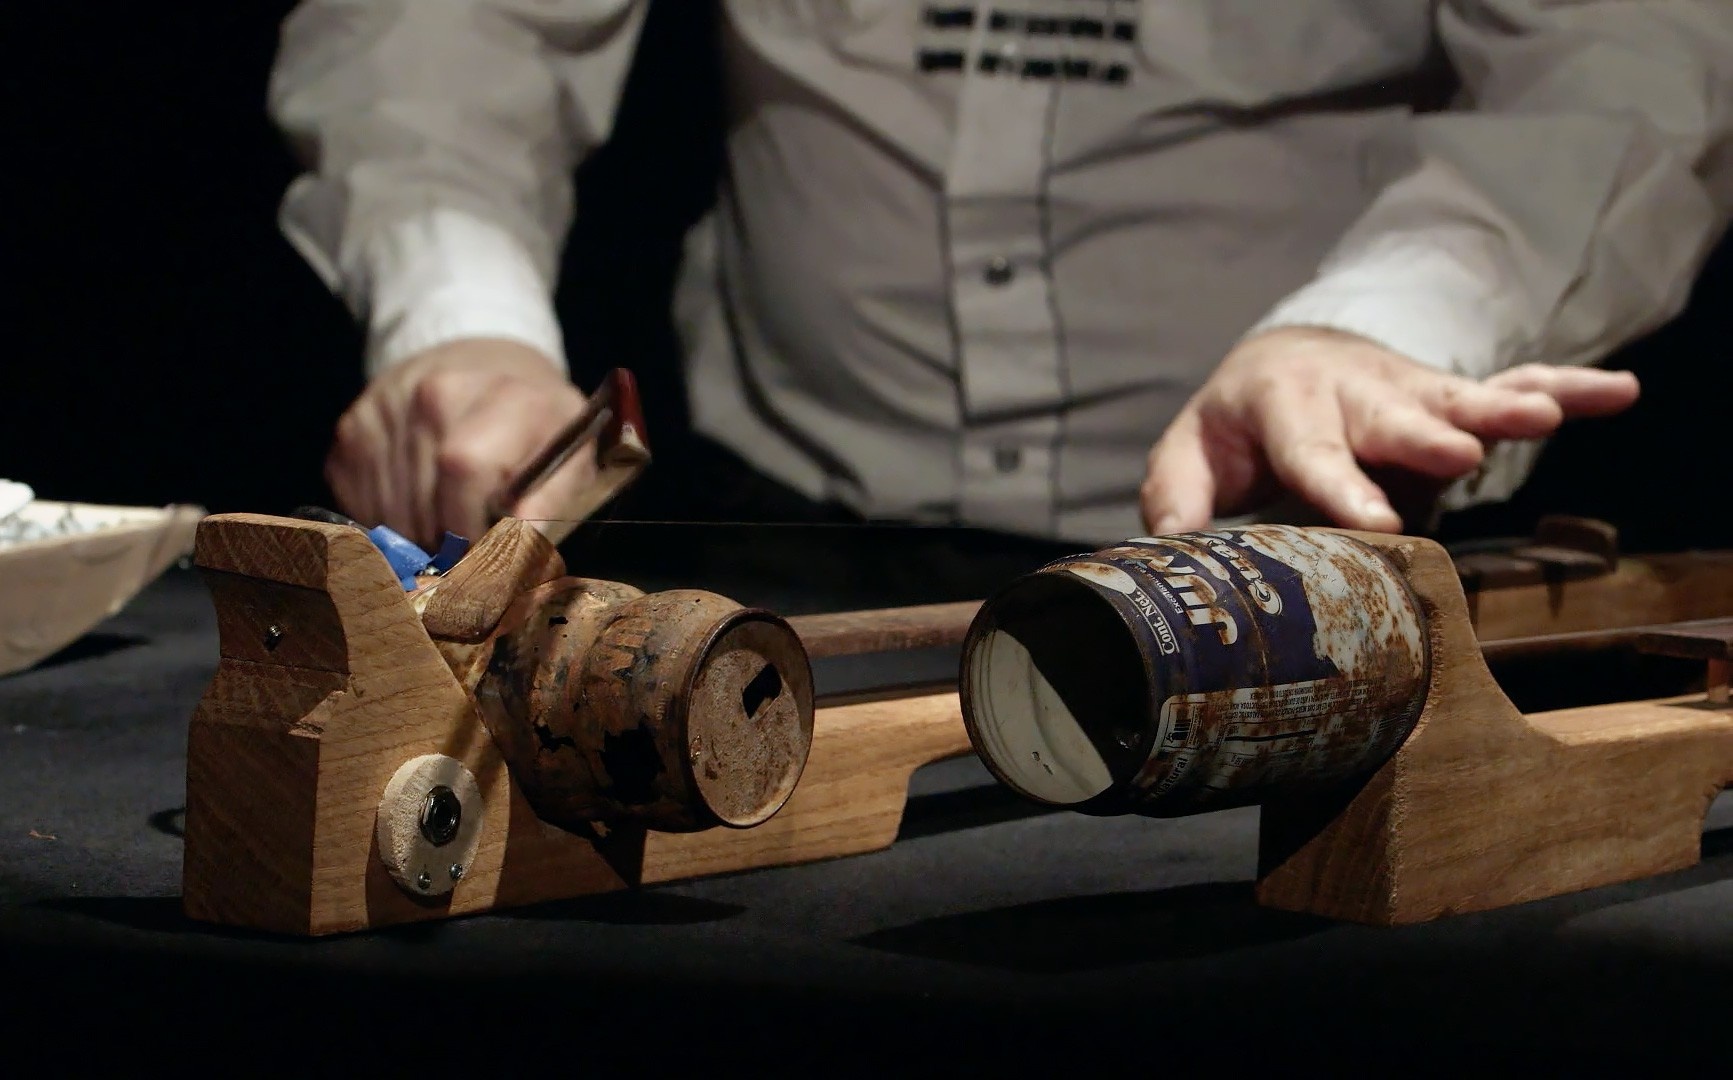 A handmade string instrument made of wood and old cans sitting on a table being played by a light-skinned person wearing a white, button-up shirt holding a violin bow.